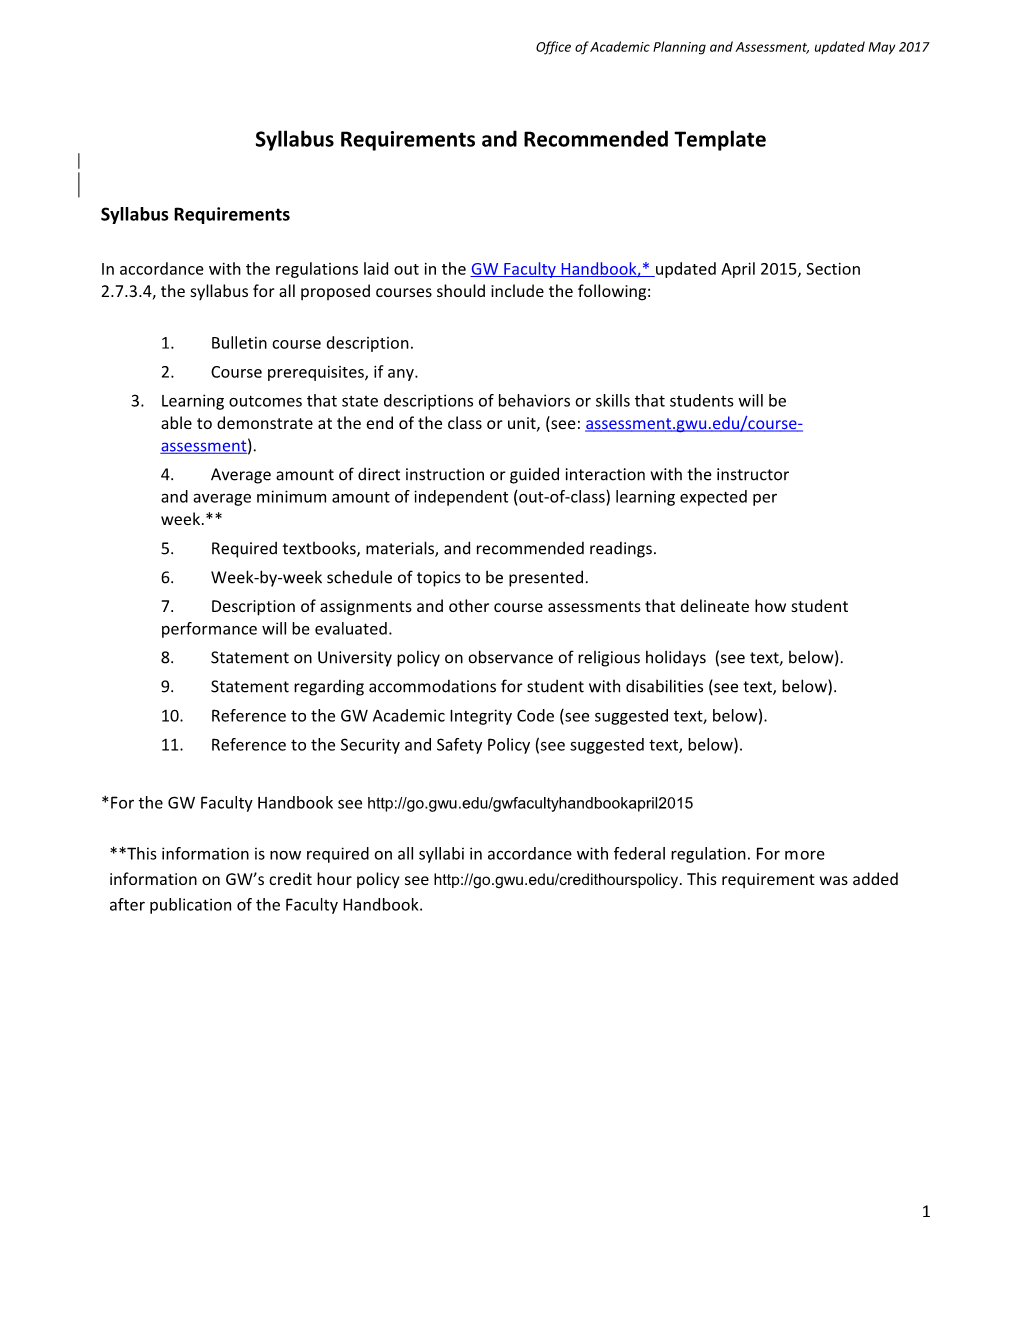 Syllabus Requirements and Recommendedtemplate